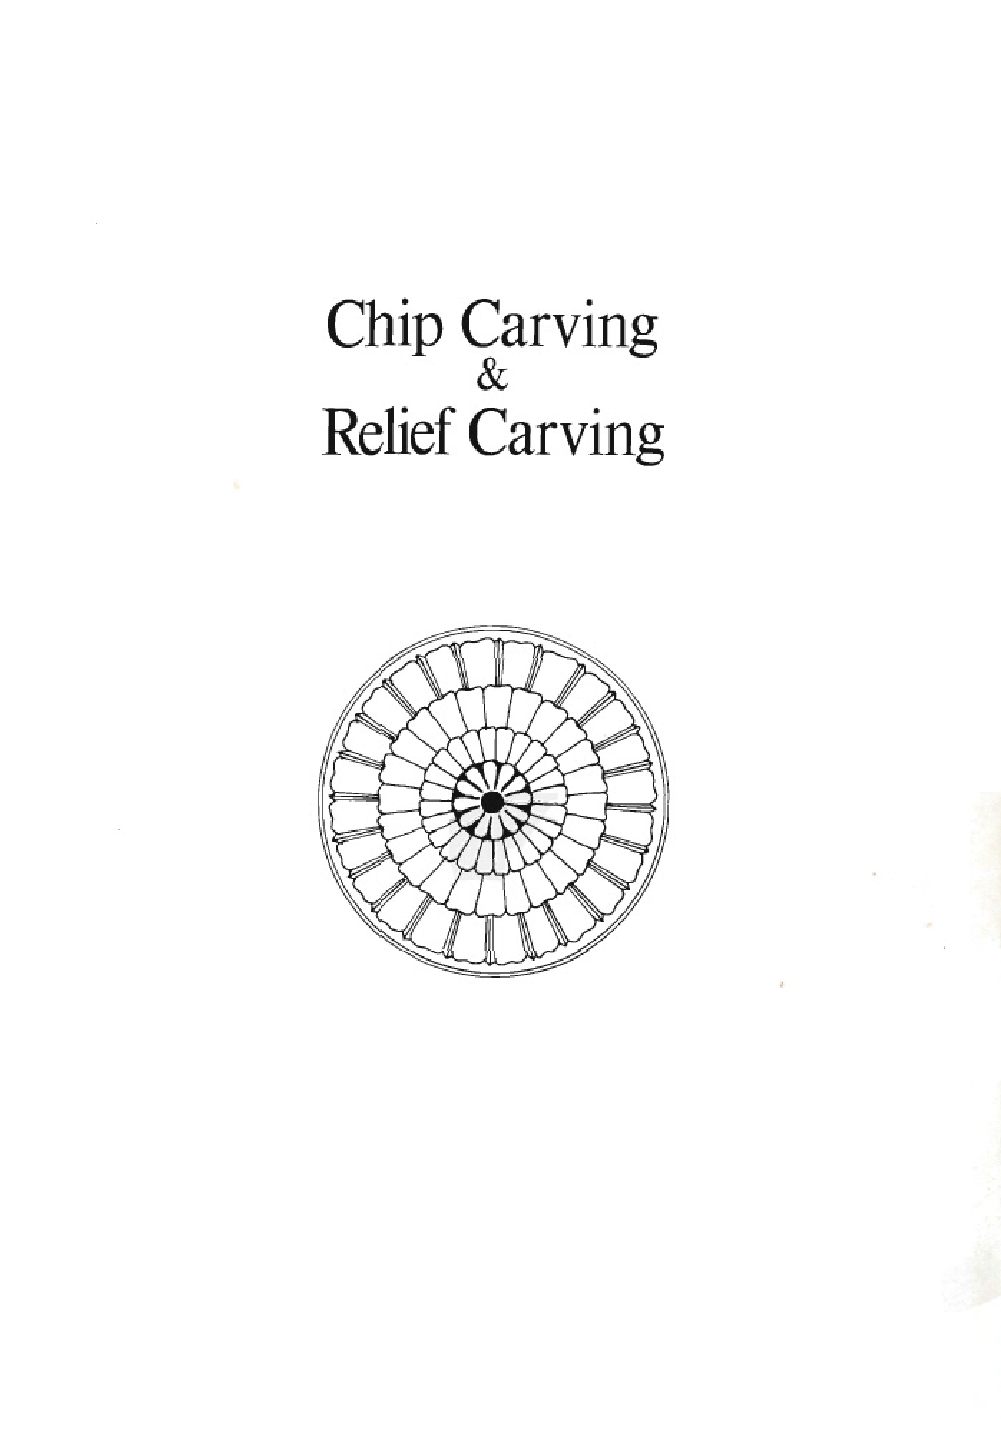 Chip Carving and Relief Carving 1987